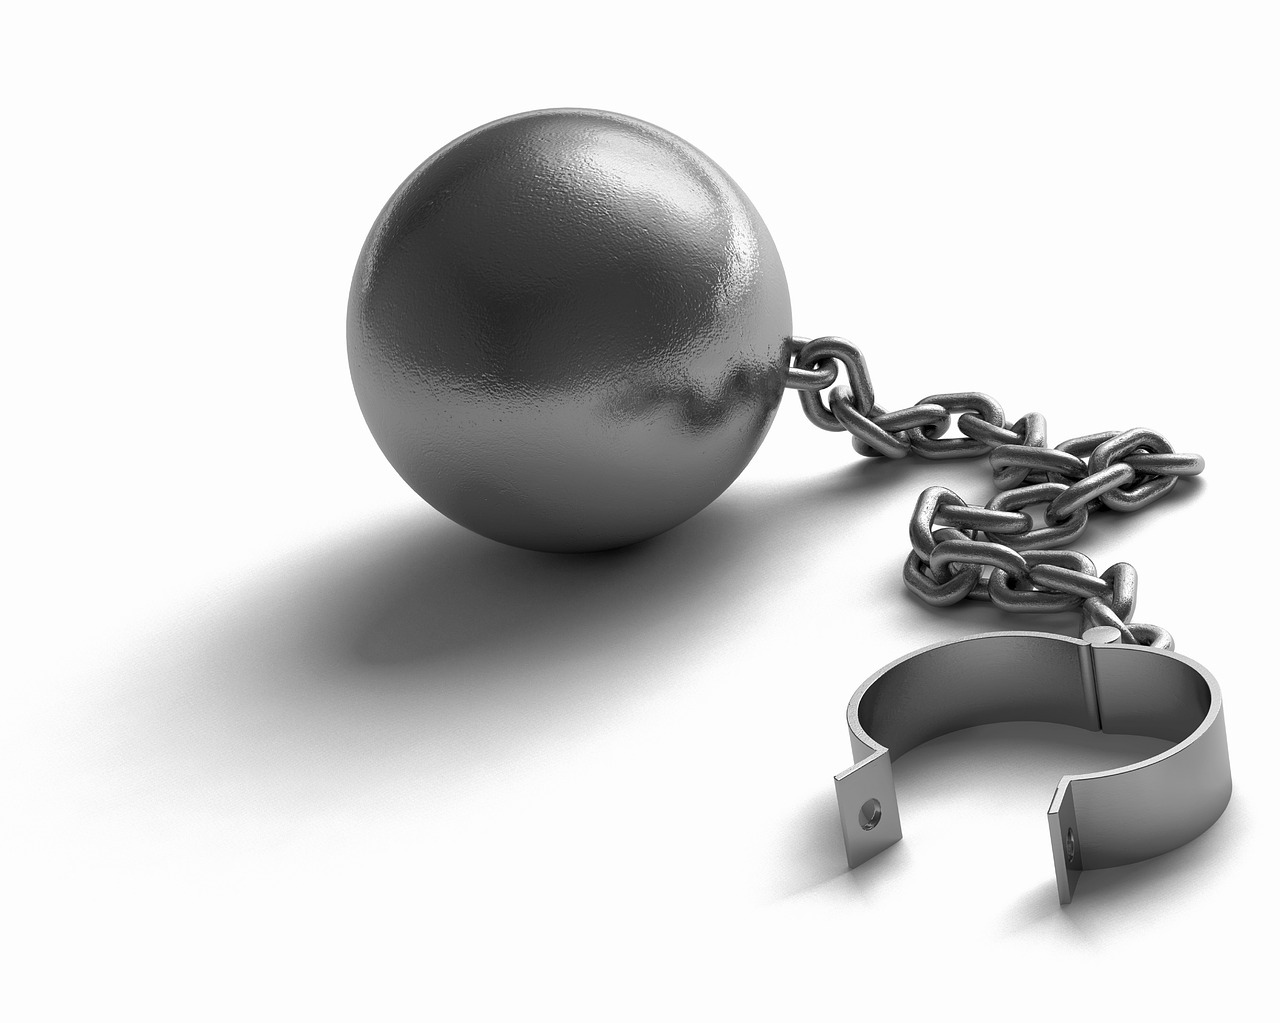 ball and chain,restrain,heavy,icon,symbol,prisoner,struggle,iron,metal,stress,metaphor,usda,freedom,slave,restraint,obstacle,drag,challenge,shackle,sphere,leg iron,annoyance,free pictures, free photos, free images, royalty free, free illustrations, public domain